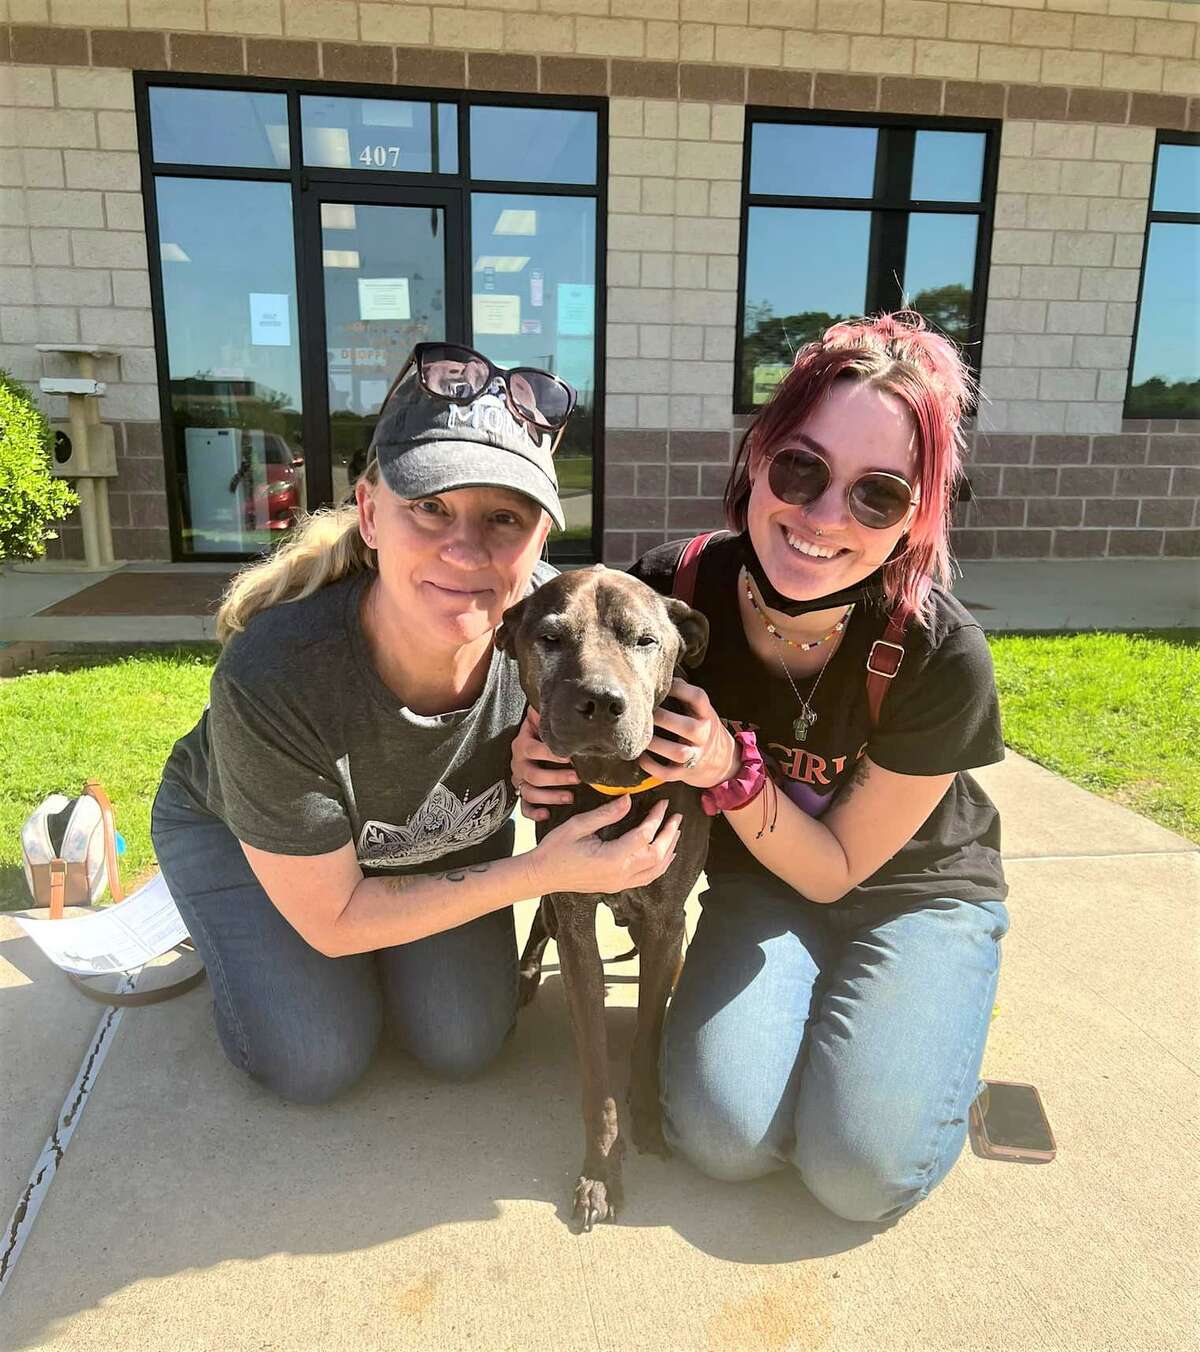 Pictured are Angela Surrett, left, her dog, Vader, and daughter, Marti Surrett, on April 7 in front of the Conroe Animal Shelter. The Surretts had not seen Vader since 2011. The dog was found on the streets of Conroe.